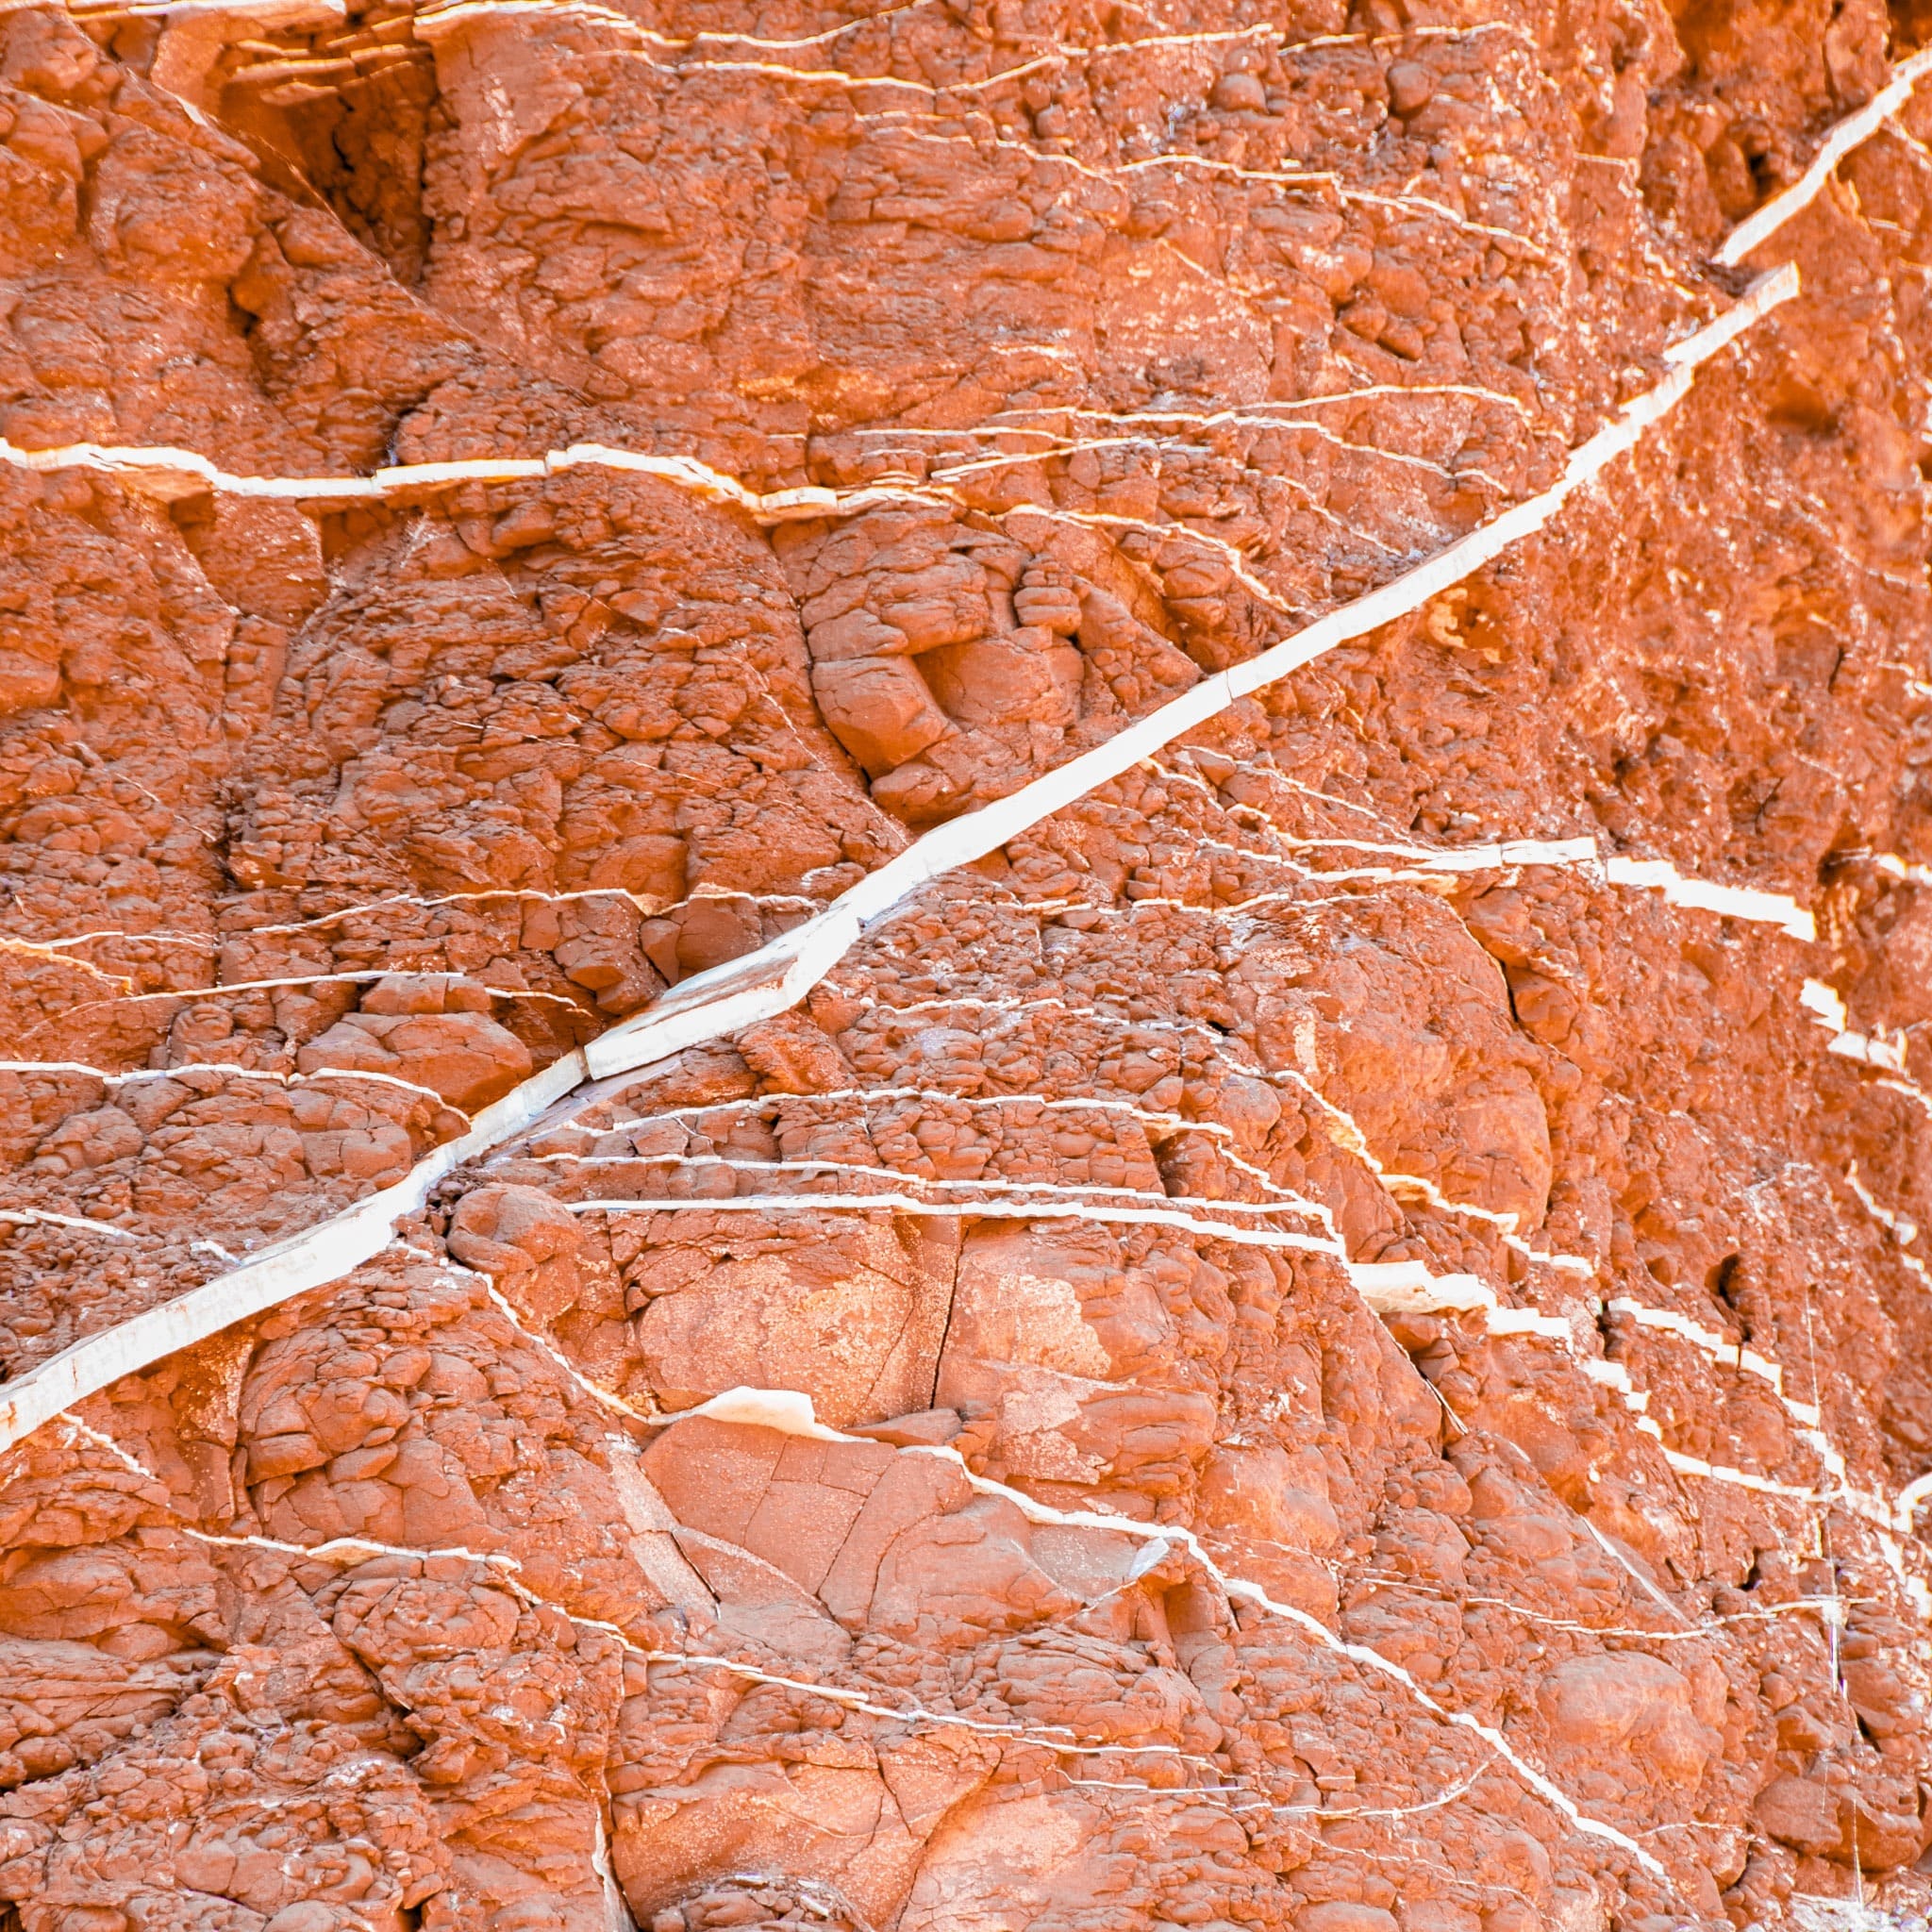 These veins of the mineral gypsum criss-cross through a member of the Moenkopi Formation along the Scenic Drive in Capitol Reef National Park, Utah.